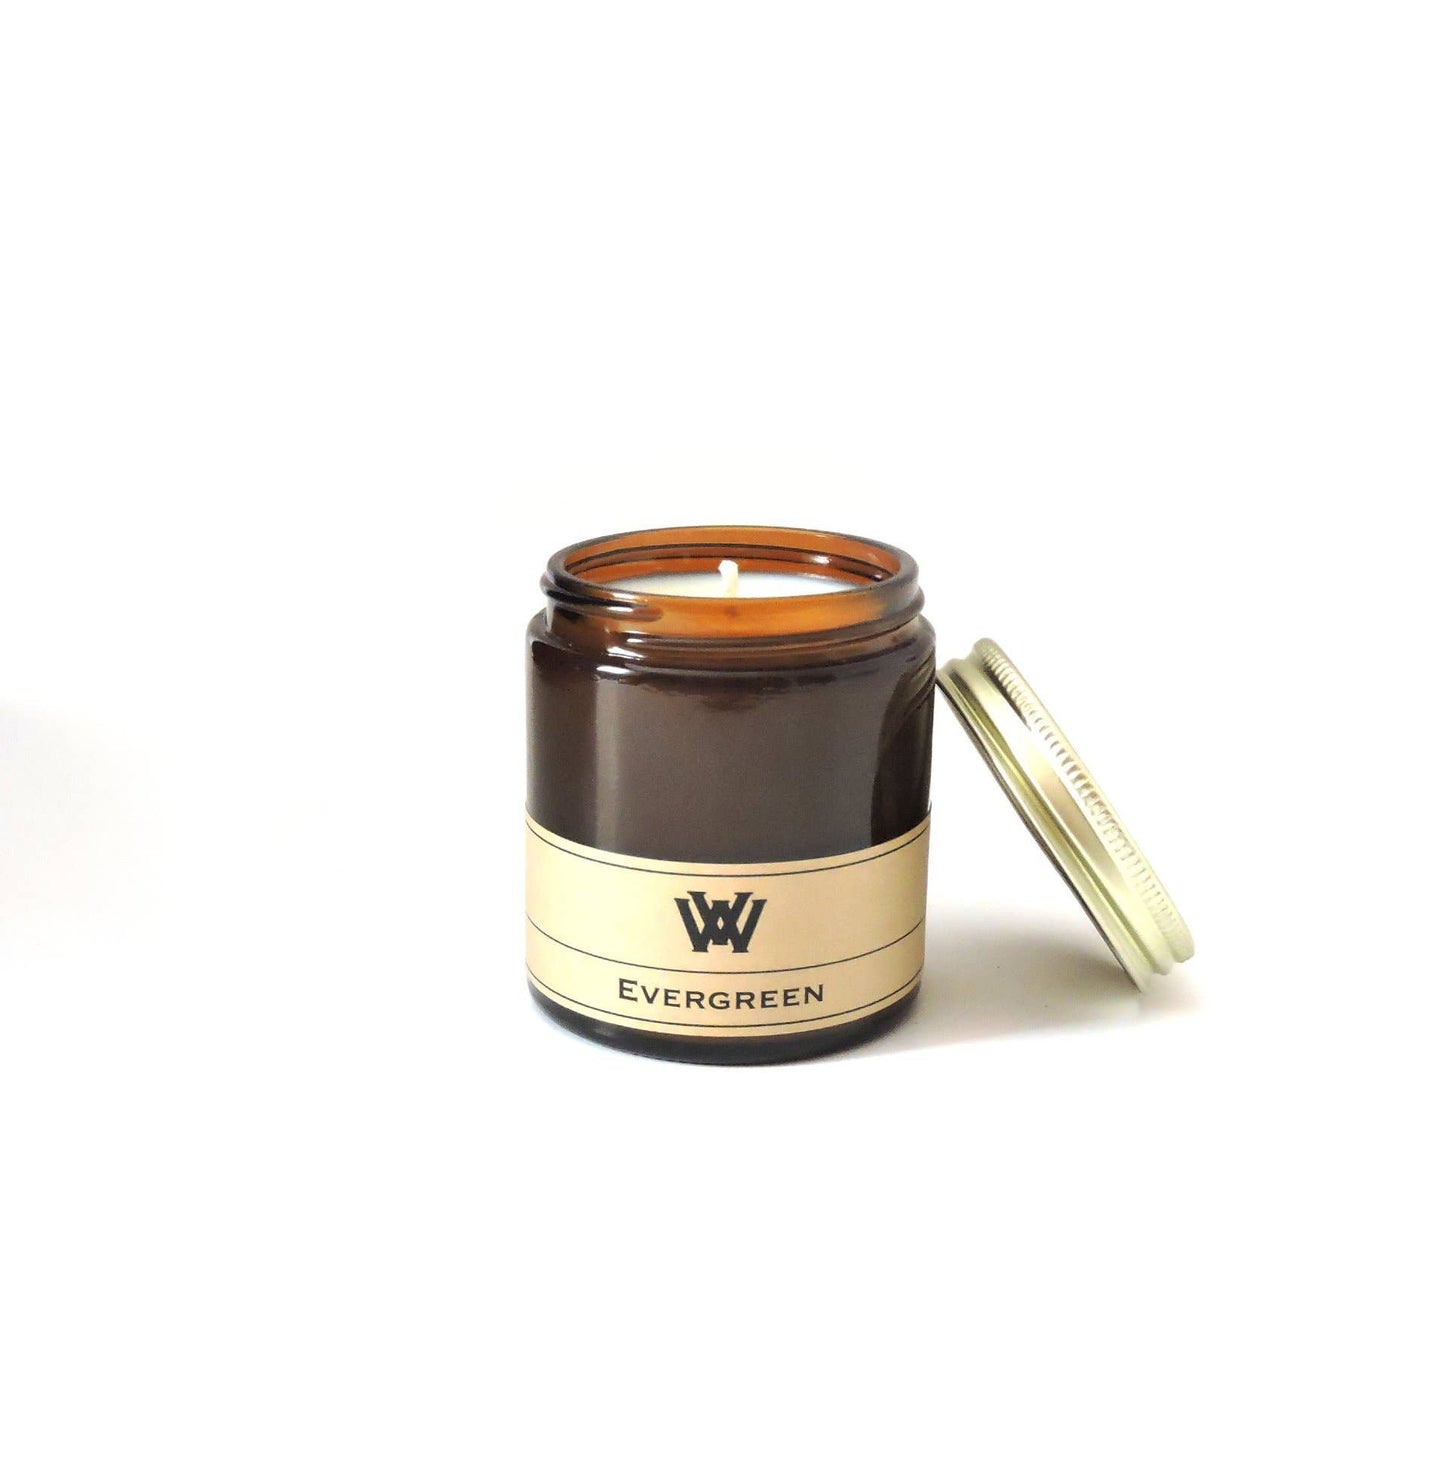 Evergreen Soy Candle - W.V. Candle Co. - 3.5 oz